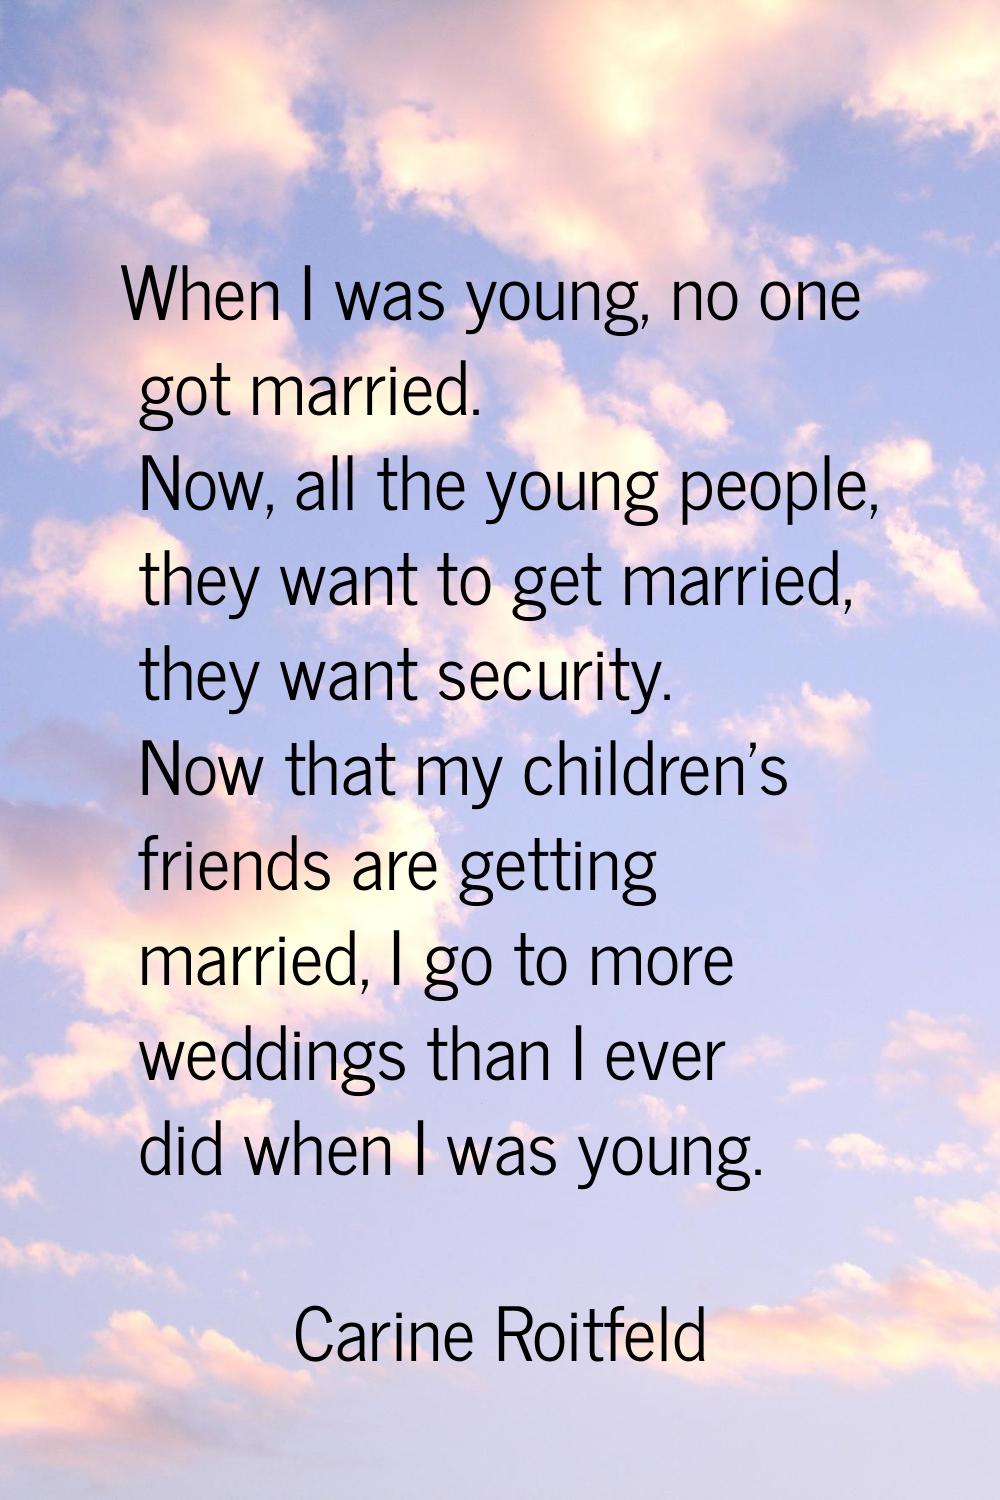 When I was young, no one got married. Now, all the young people, they want to get married, they wan